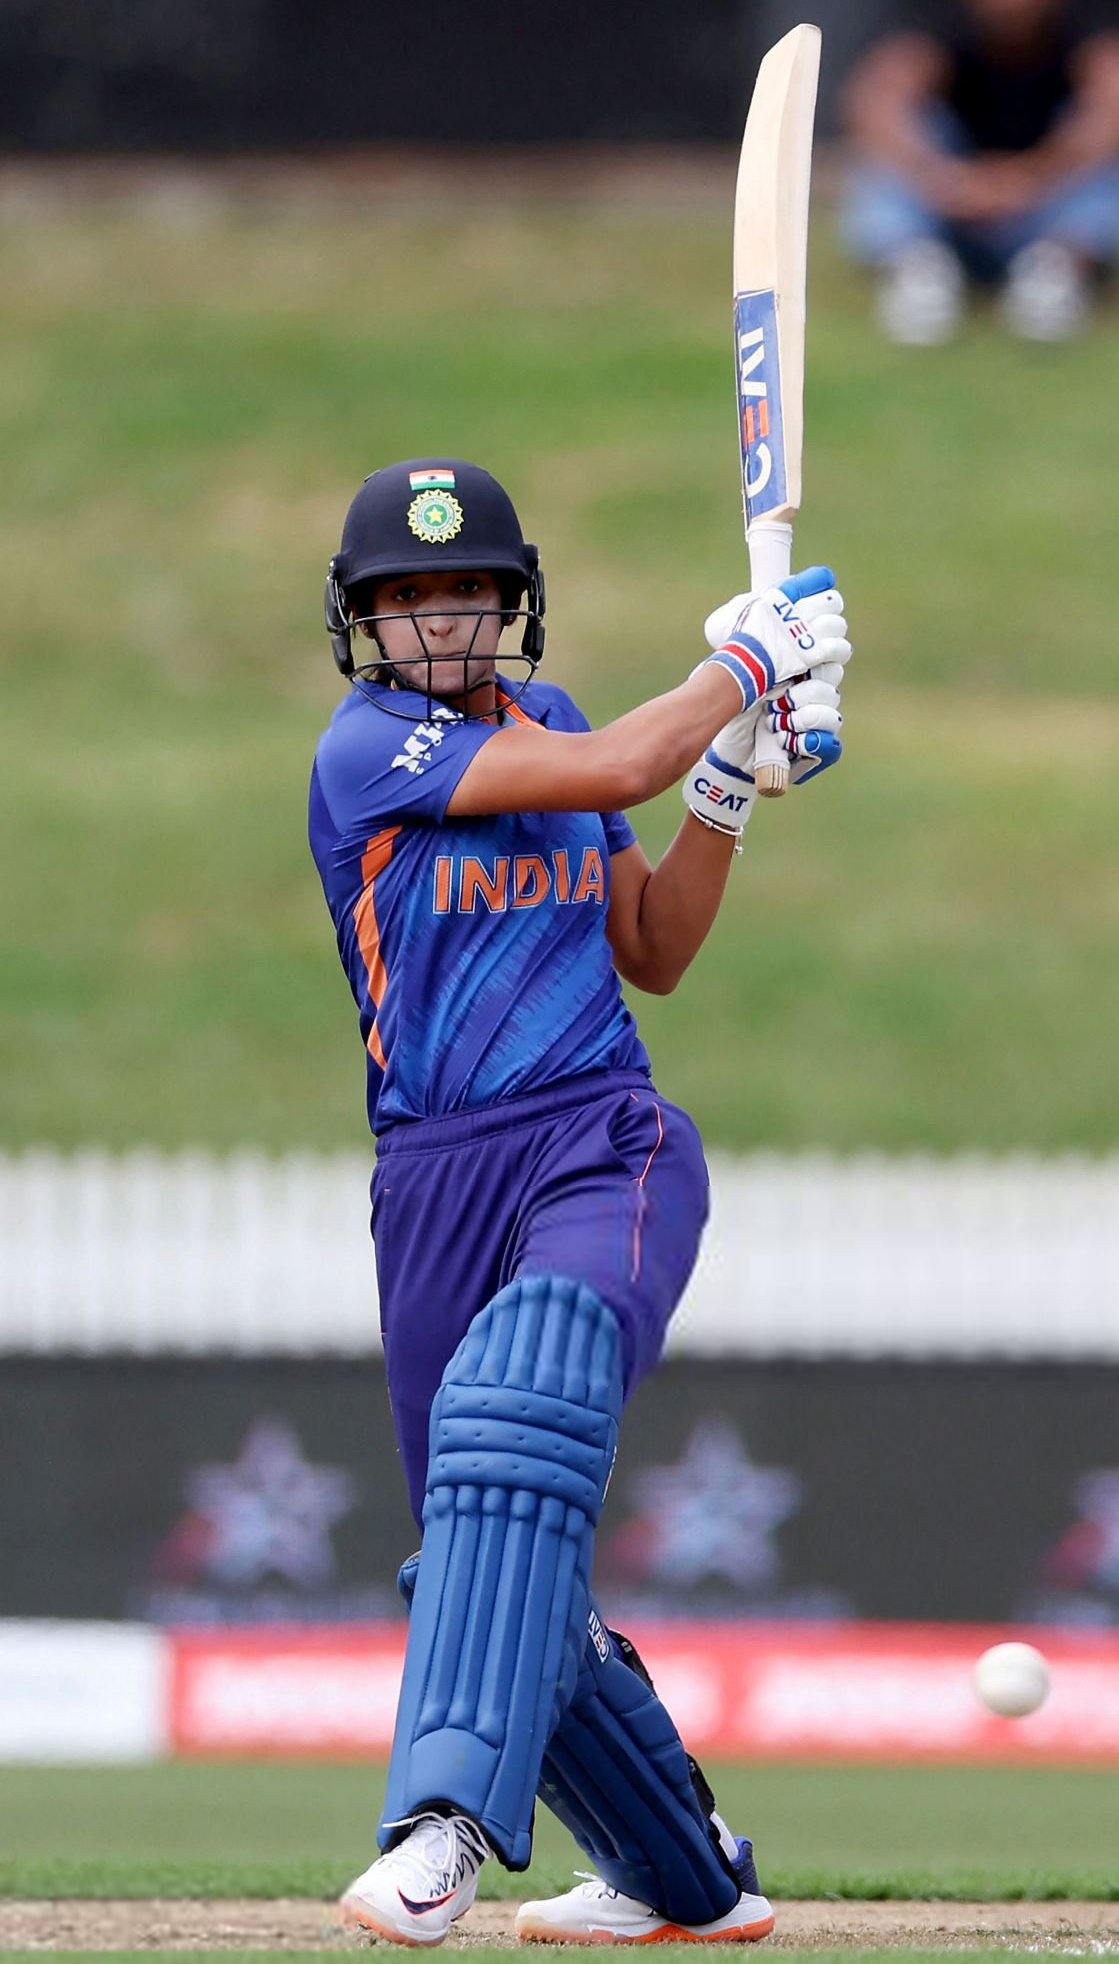 Harmanpreet Kaur: What makes her different from others? | Sportz Point